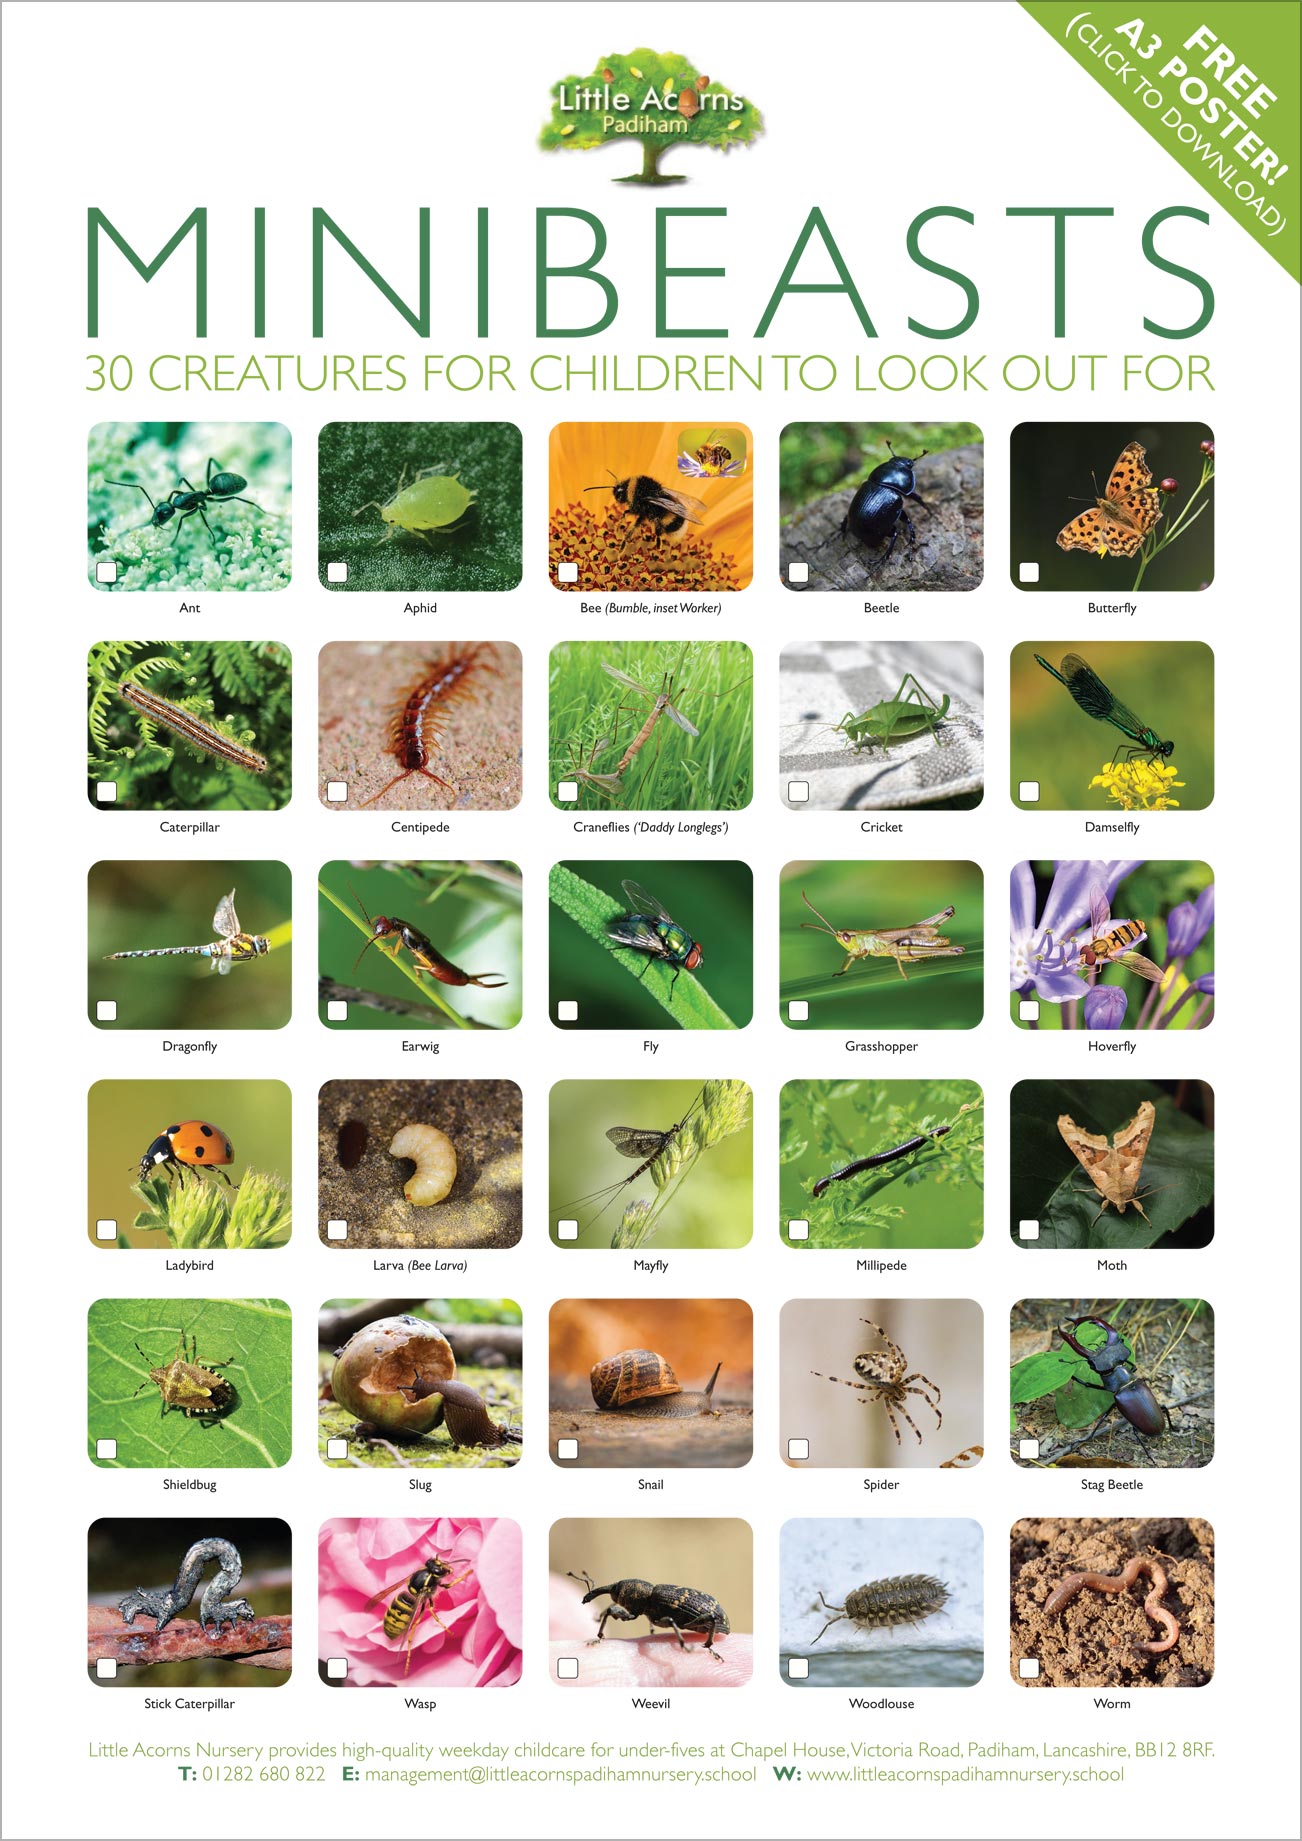 Preview showing the free minibeasts poster (click to download the high resolution version in Acrobat PDF format)